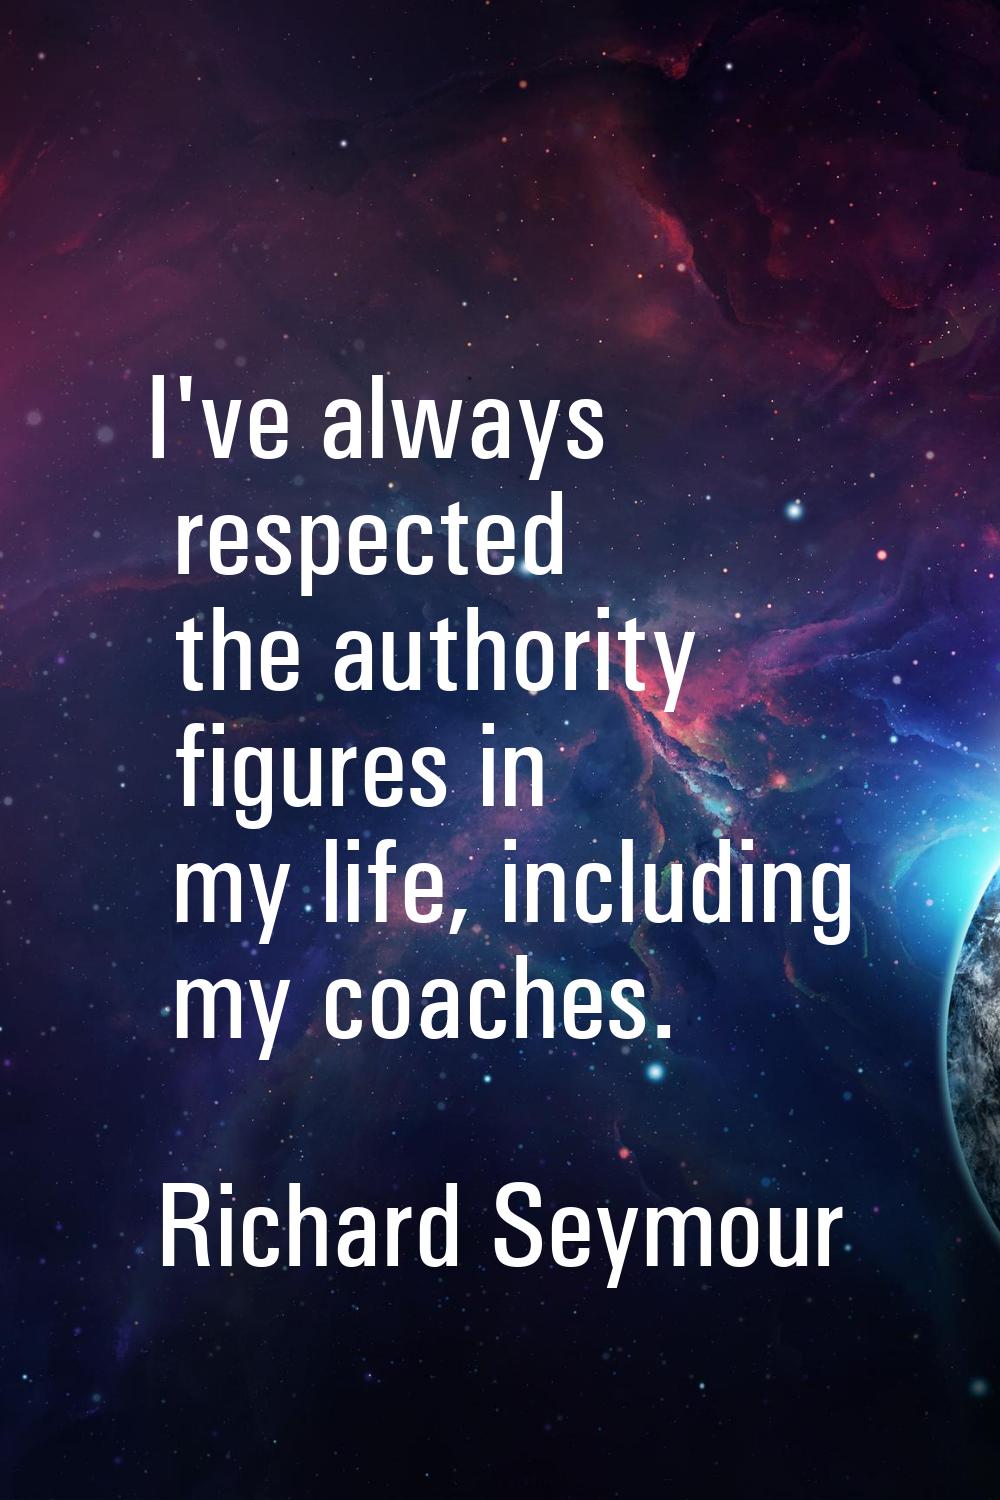 I've always respected the authority figures in my life, including my coaches.